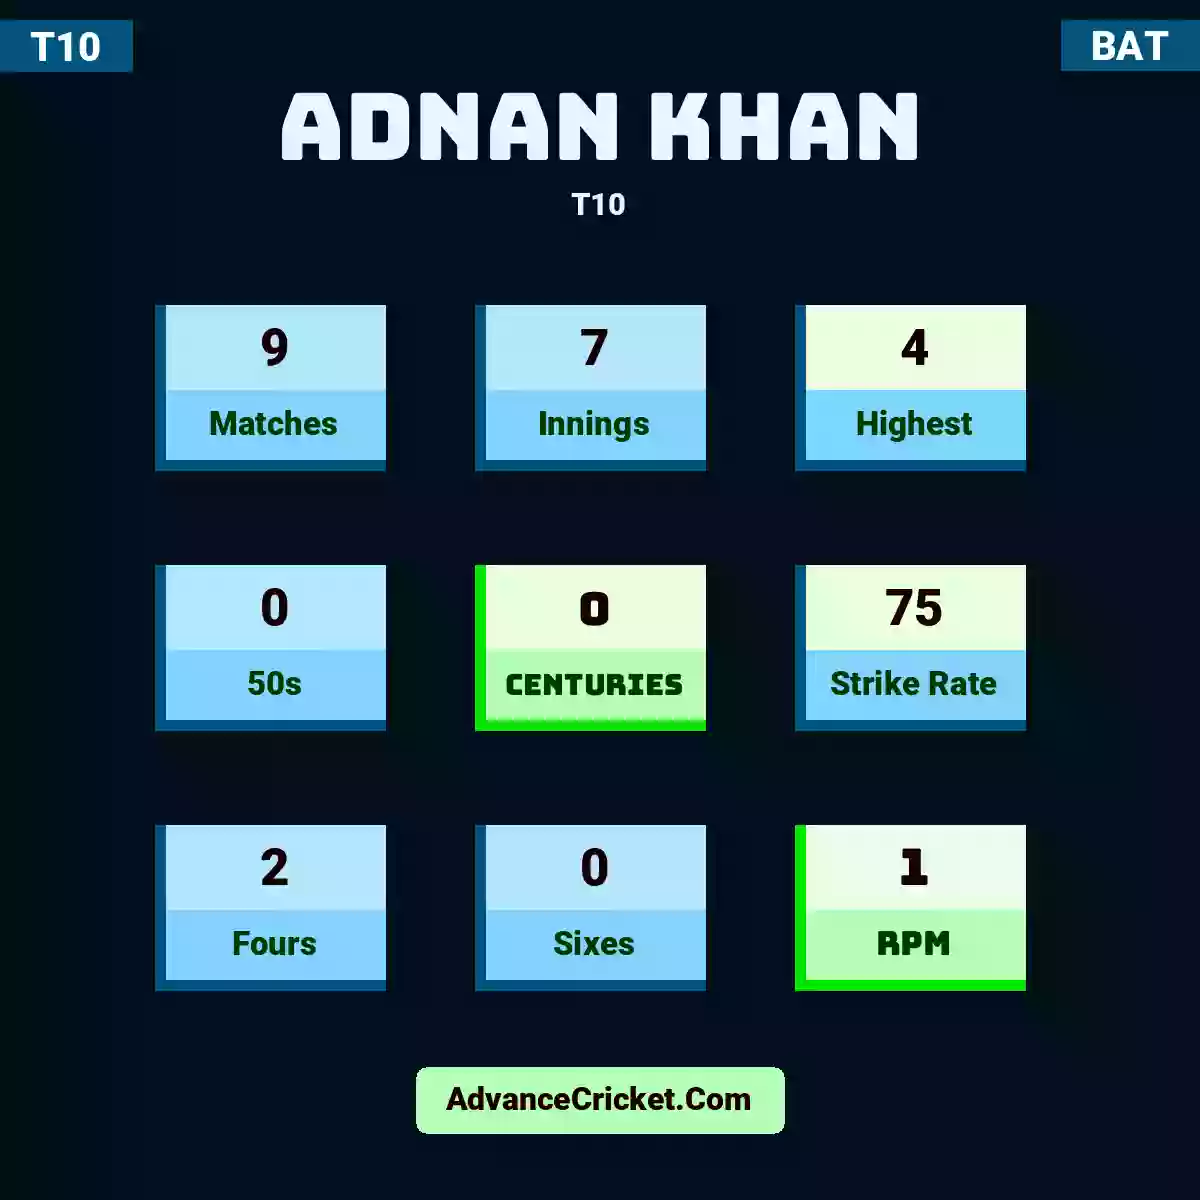 Adnan Khan T10 , Adnan Khan played 9 matches, scored 4 runs as highest, 0 half-centuries, and 0 centuries, with a strike rate of 75. A.Khan hit 2 fours and 0 sixes, with an RPM of 1.